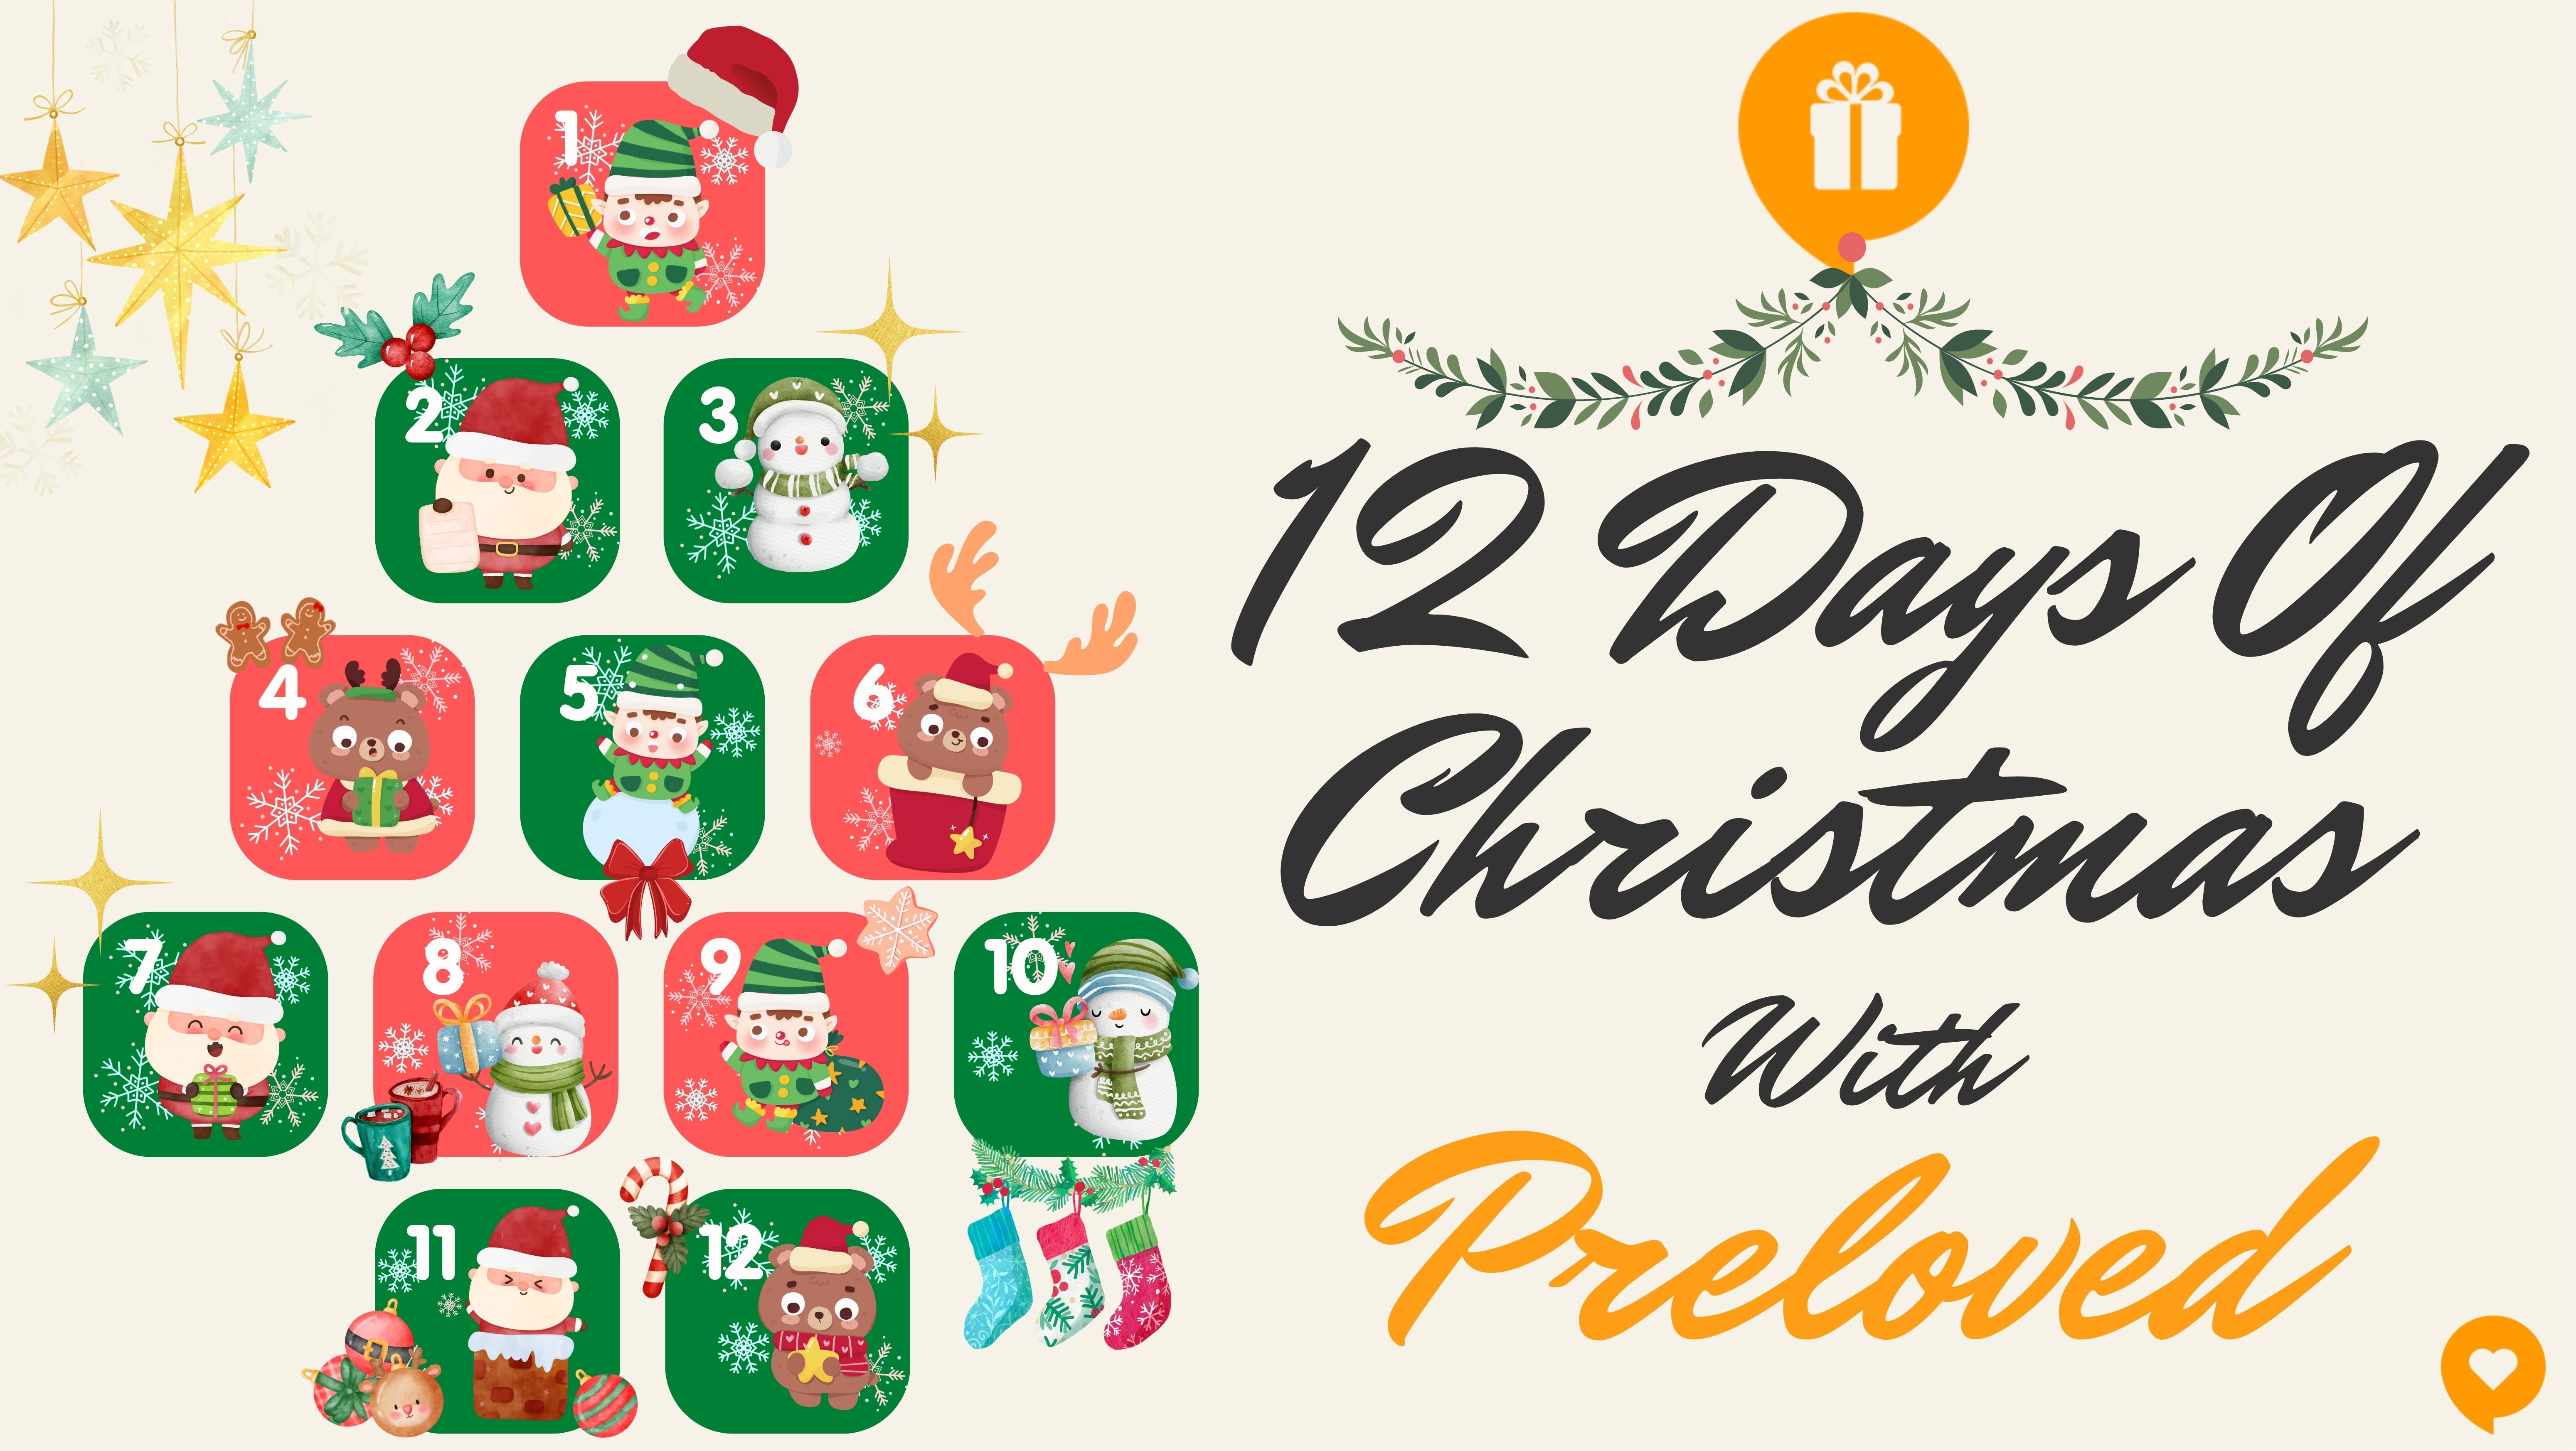 Preloved's 12 Days Of Christmas Giveaway!